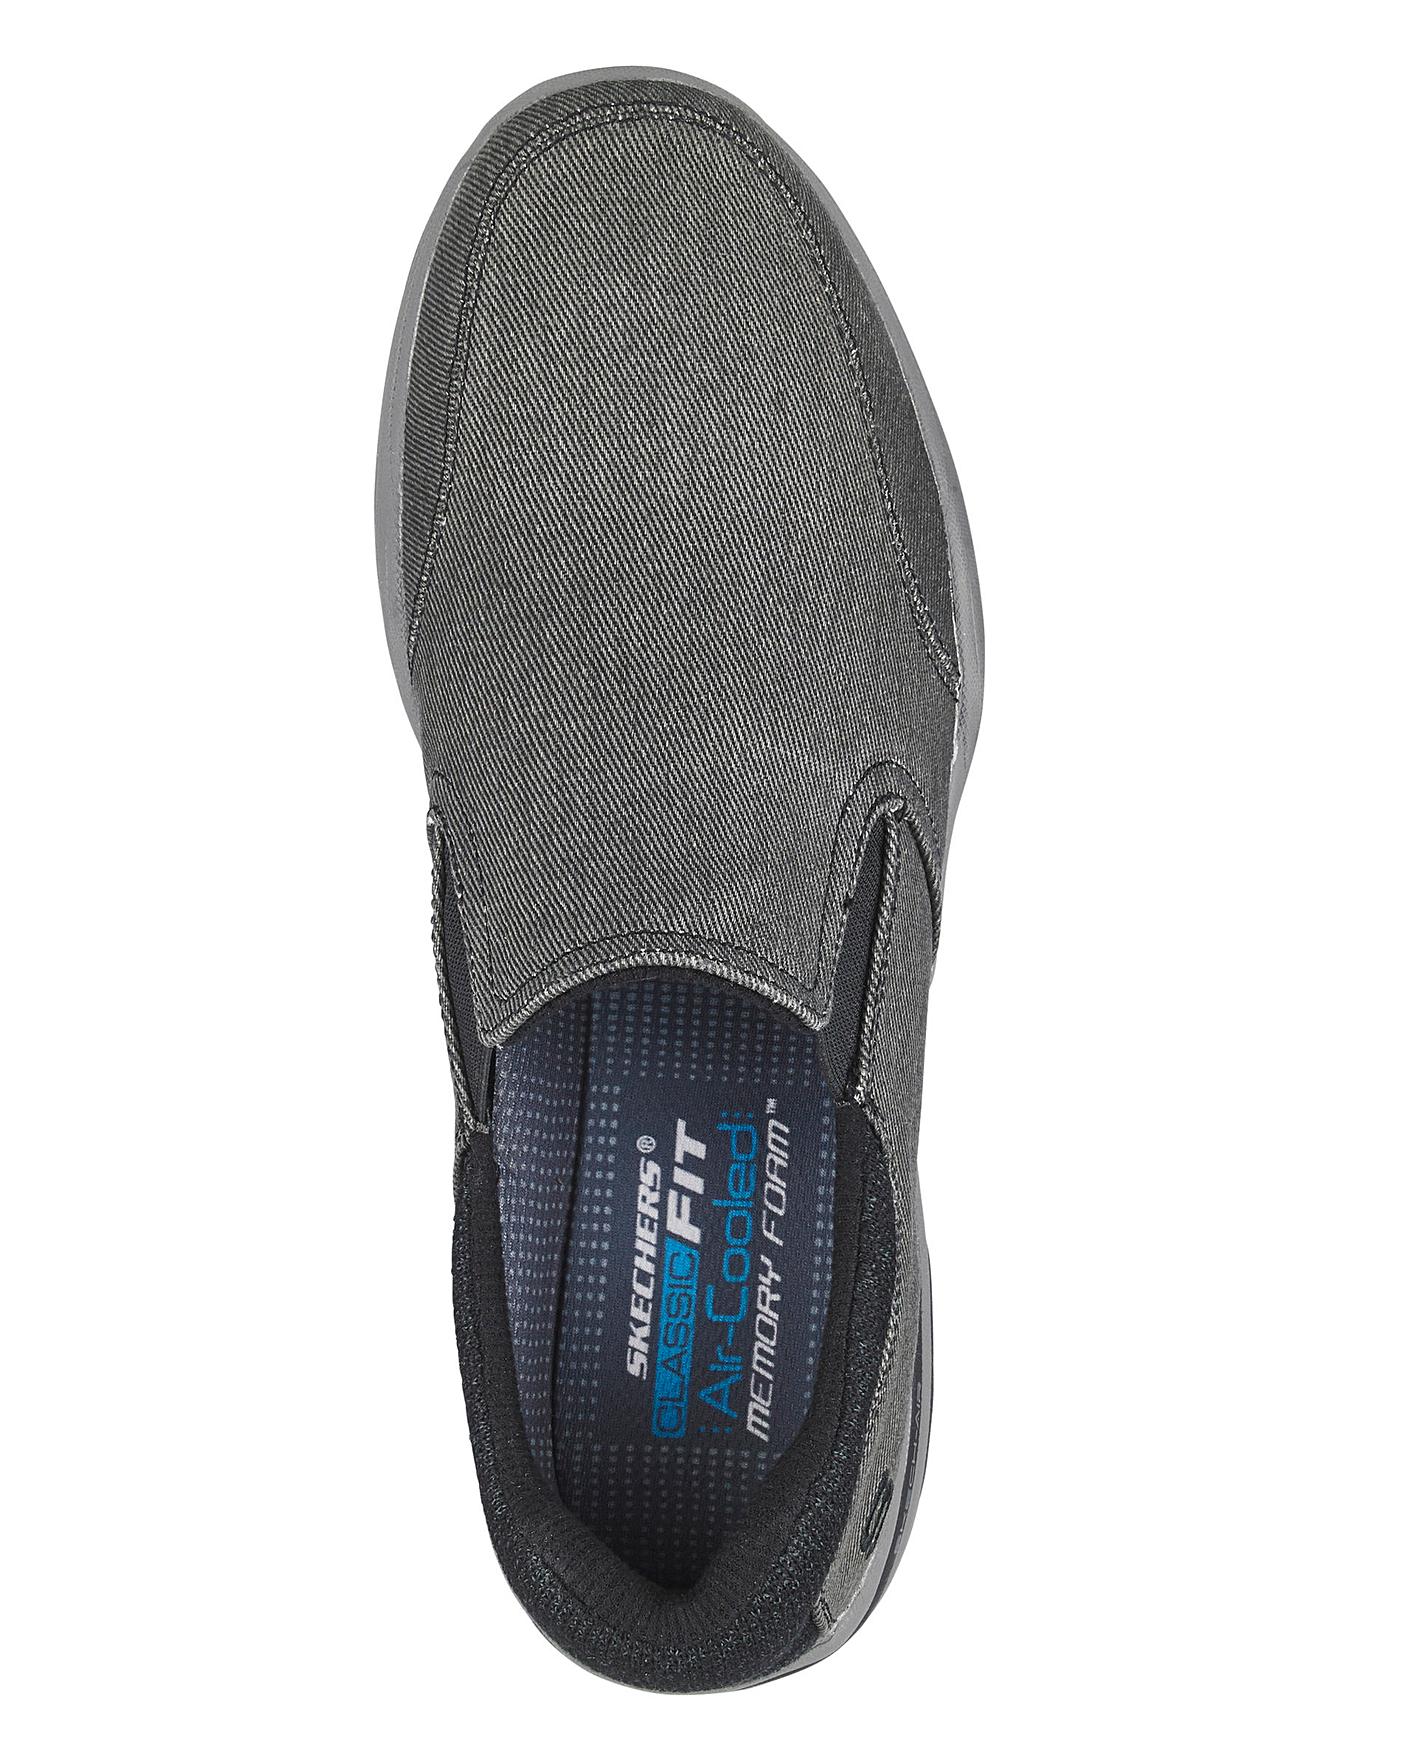 Skechers Canvas Slip On | Crazy Clearance